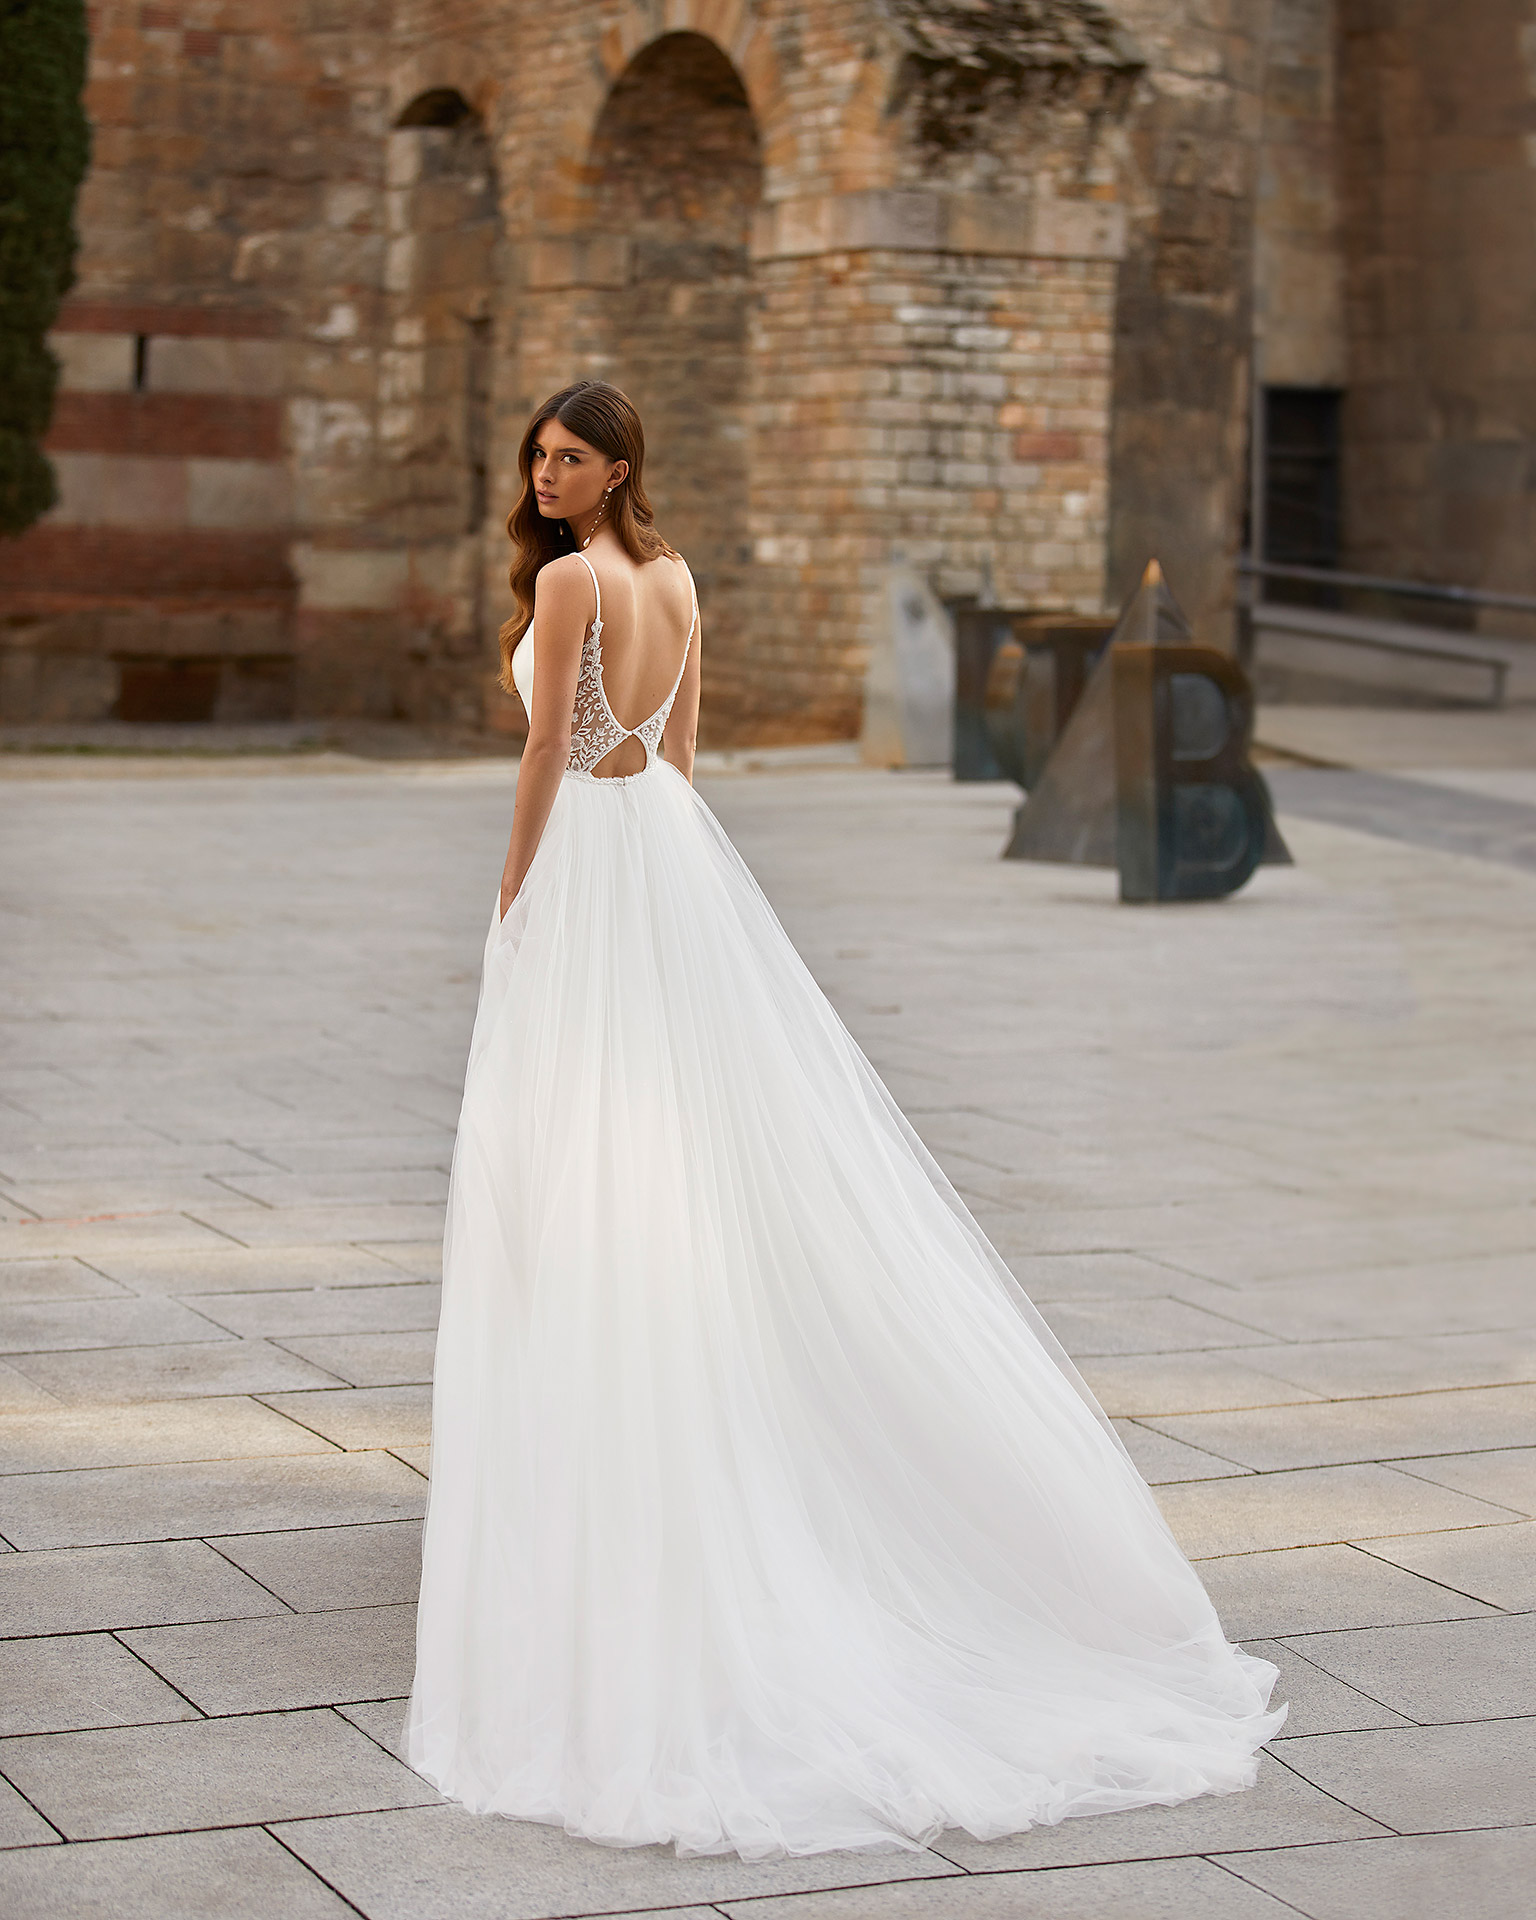 Two-piece sheath-style wedding dress made of stretch crepe, including a tulle overskirt; with a deep-plunge neckline and a lace and beadwork back. Dreamy Luna Novias outfit made of stretch crepe combined with beadwork lace and tulle. LUNA_NOVIAS.